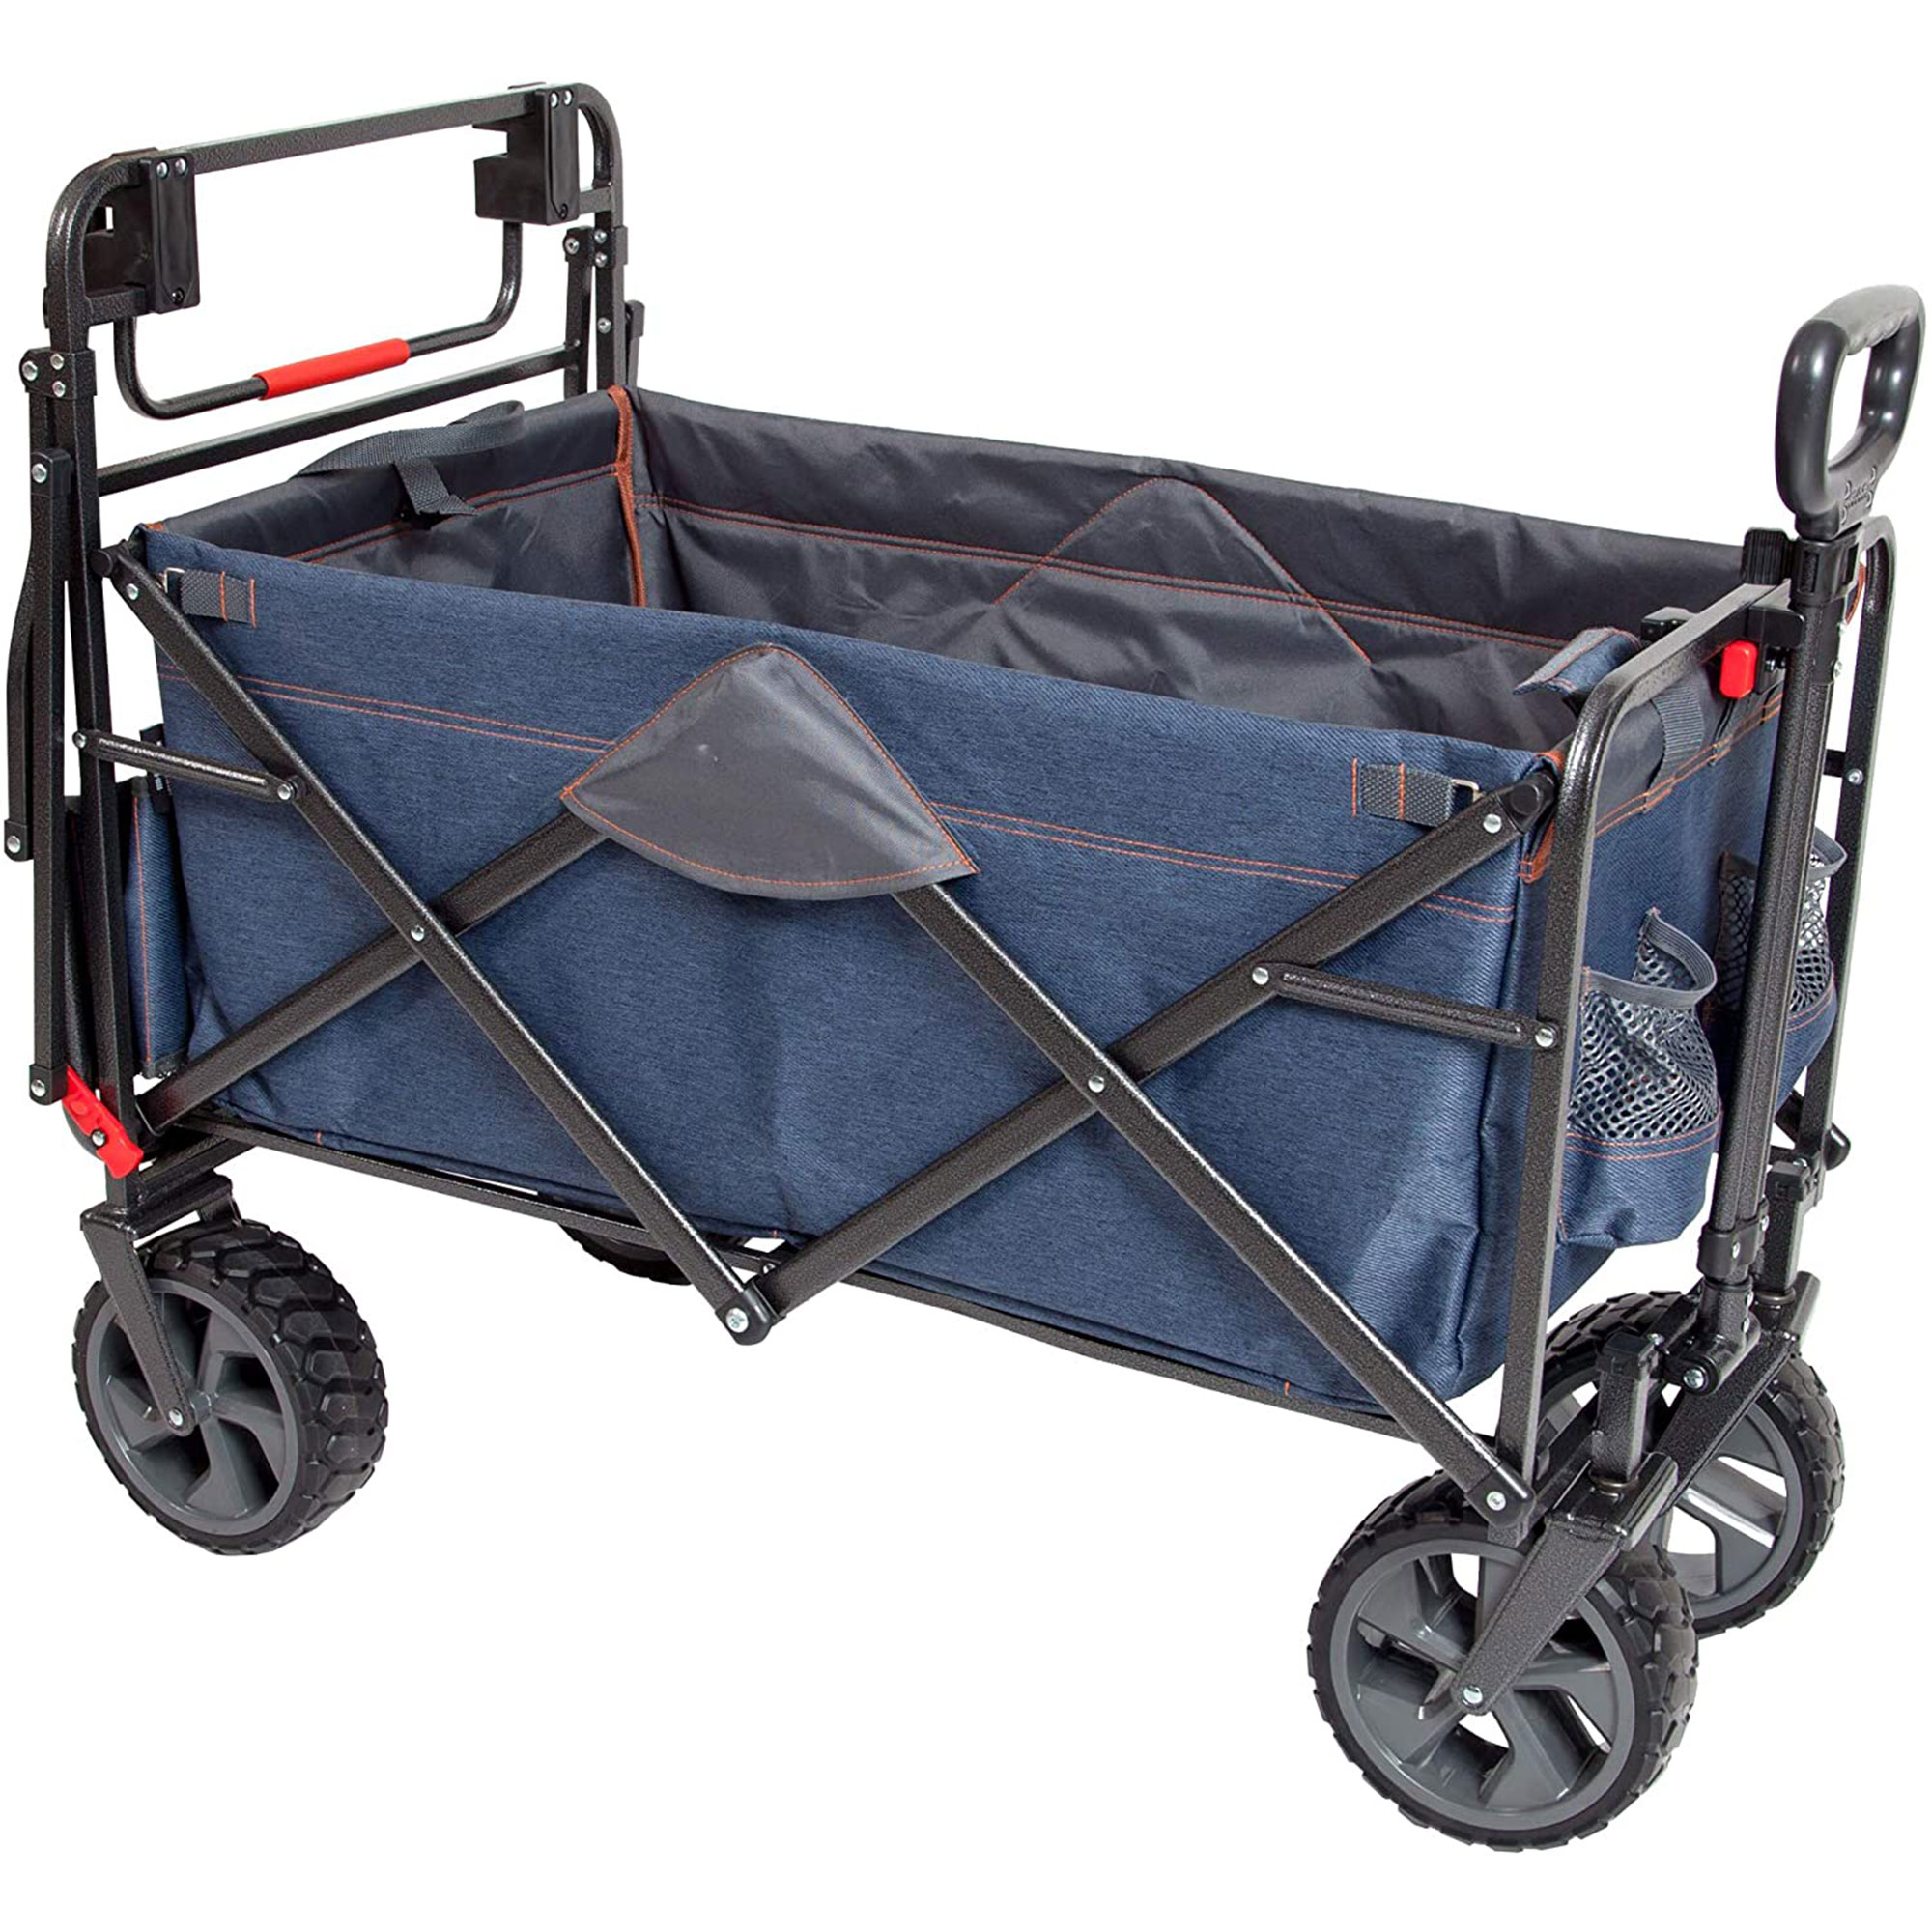 Mac Sports Collapsible Heavy Duty Push Pull Utility Cart Wagon, Blue - image 1 of 9